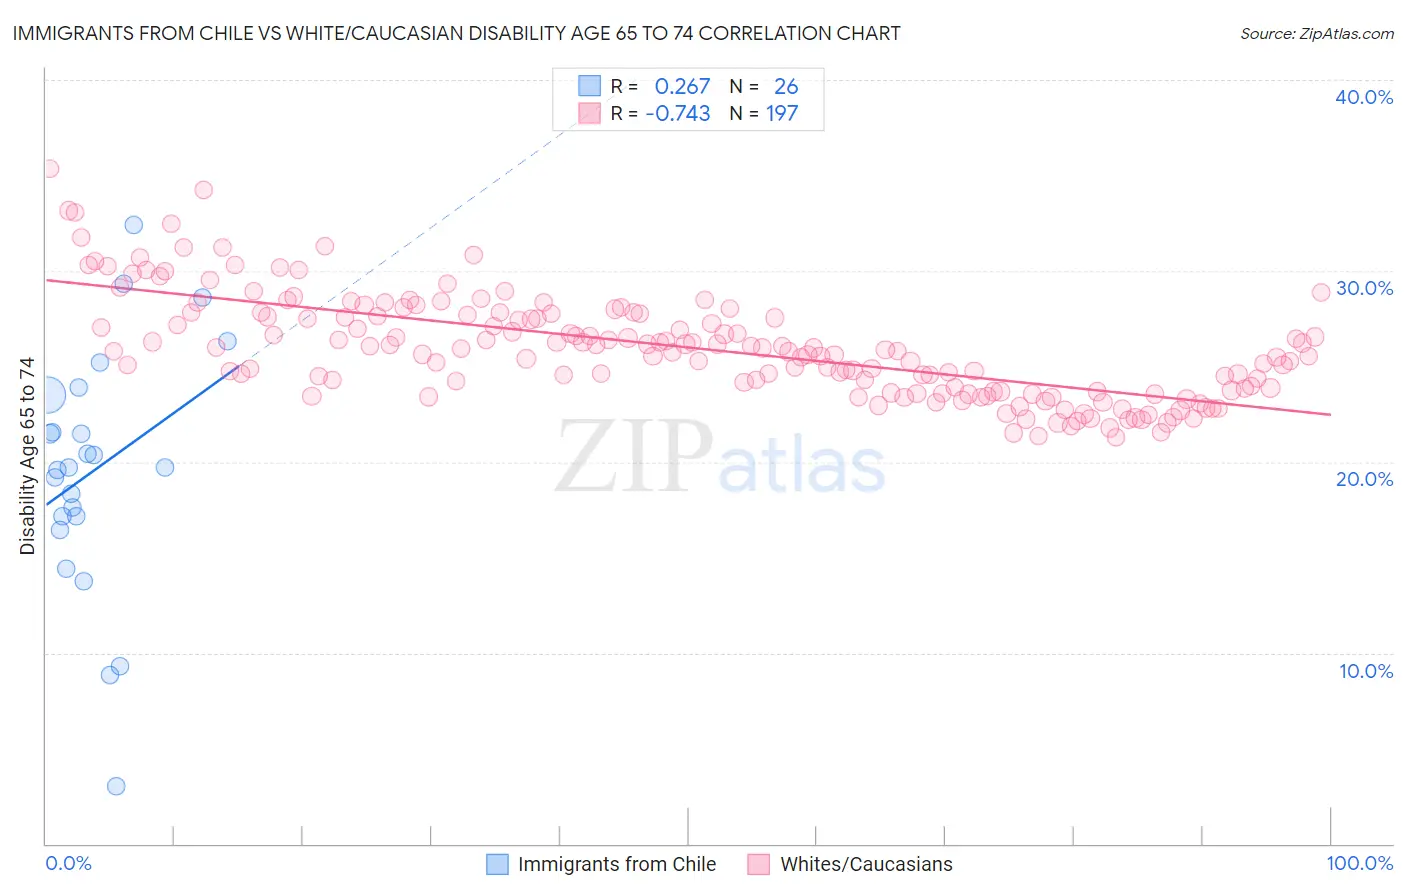 Immigrants from Chile vs White/Caucasian Disability Age 65 to 74